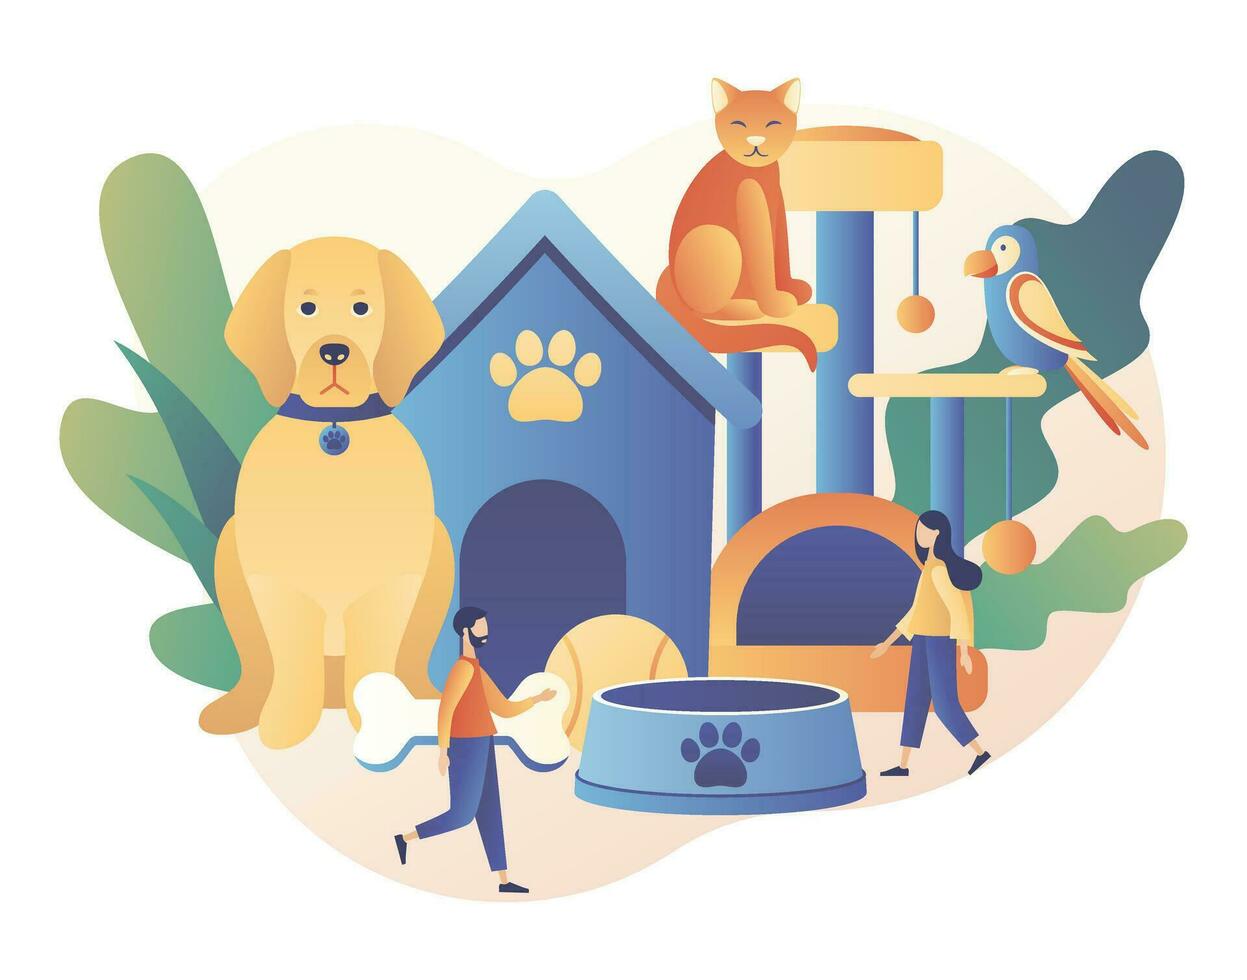 Pets care services. Tiny people and Pet hotel, daycare, veterinary service. Pet shop. Modern flat cartoon style. Vector illustration on white background